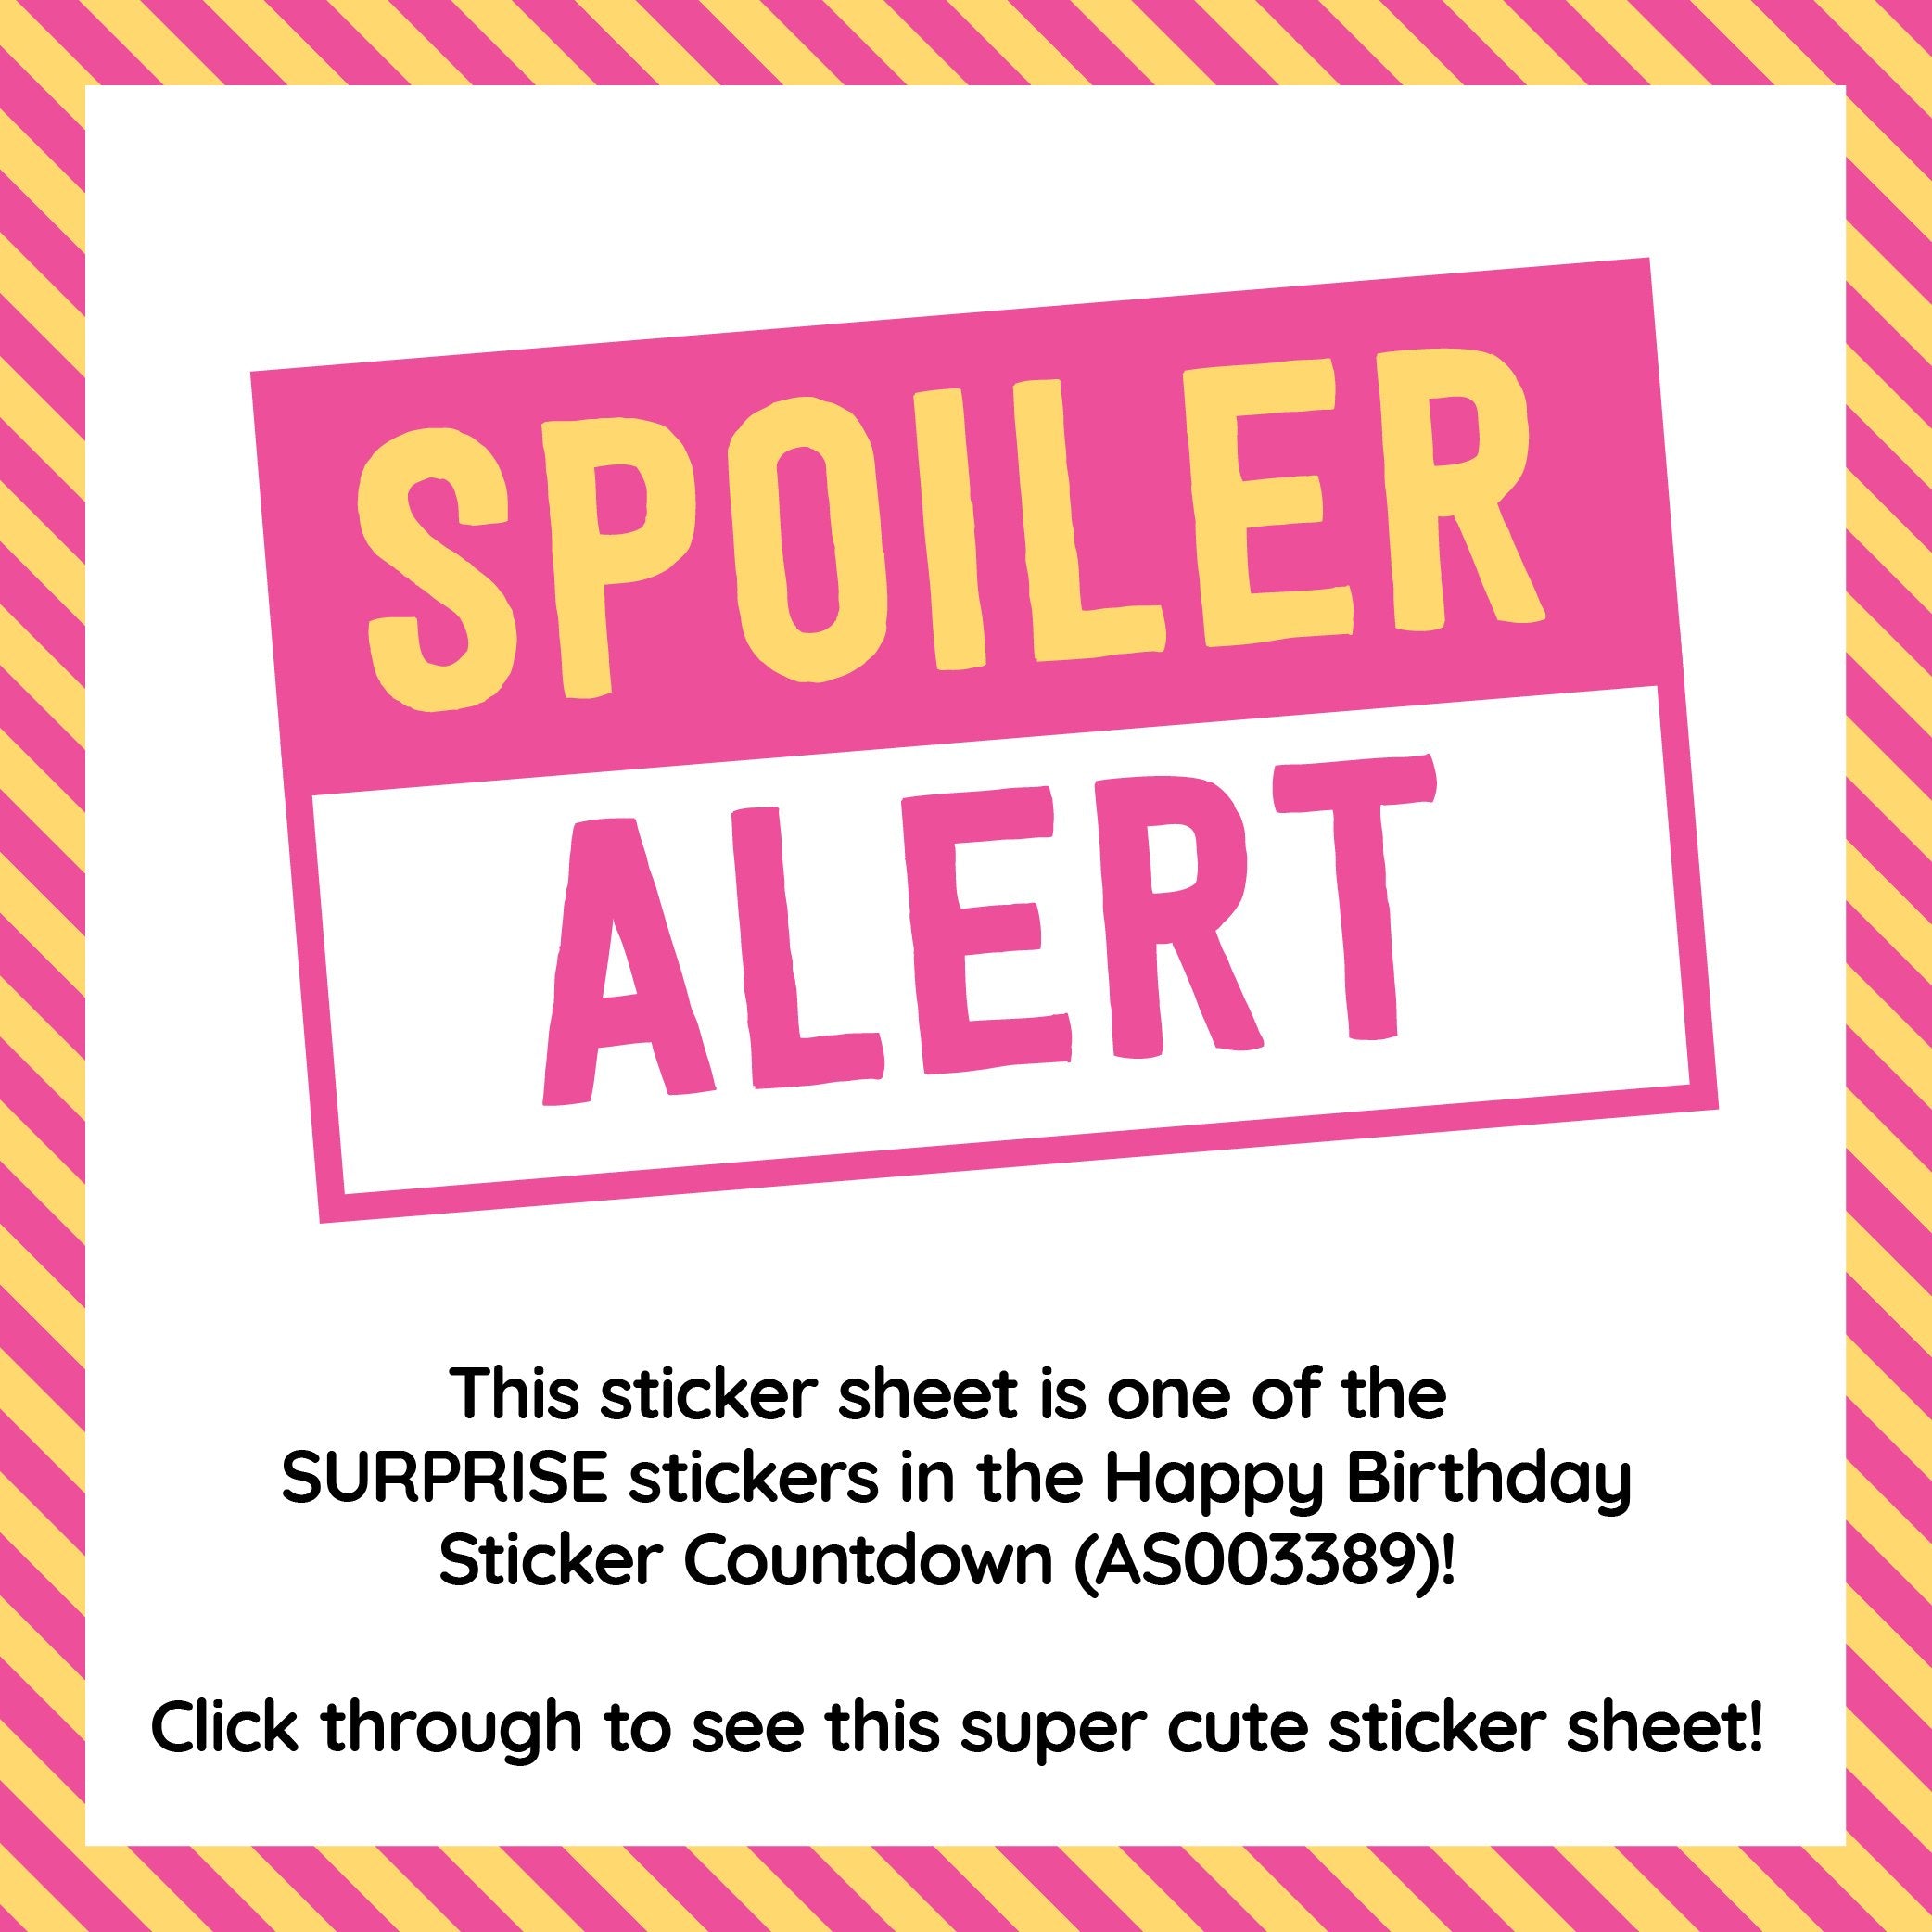 Ideas for Sticker Gifts from Pipsticks - EventOTB